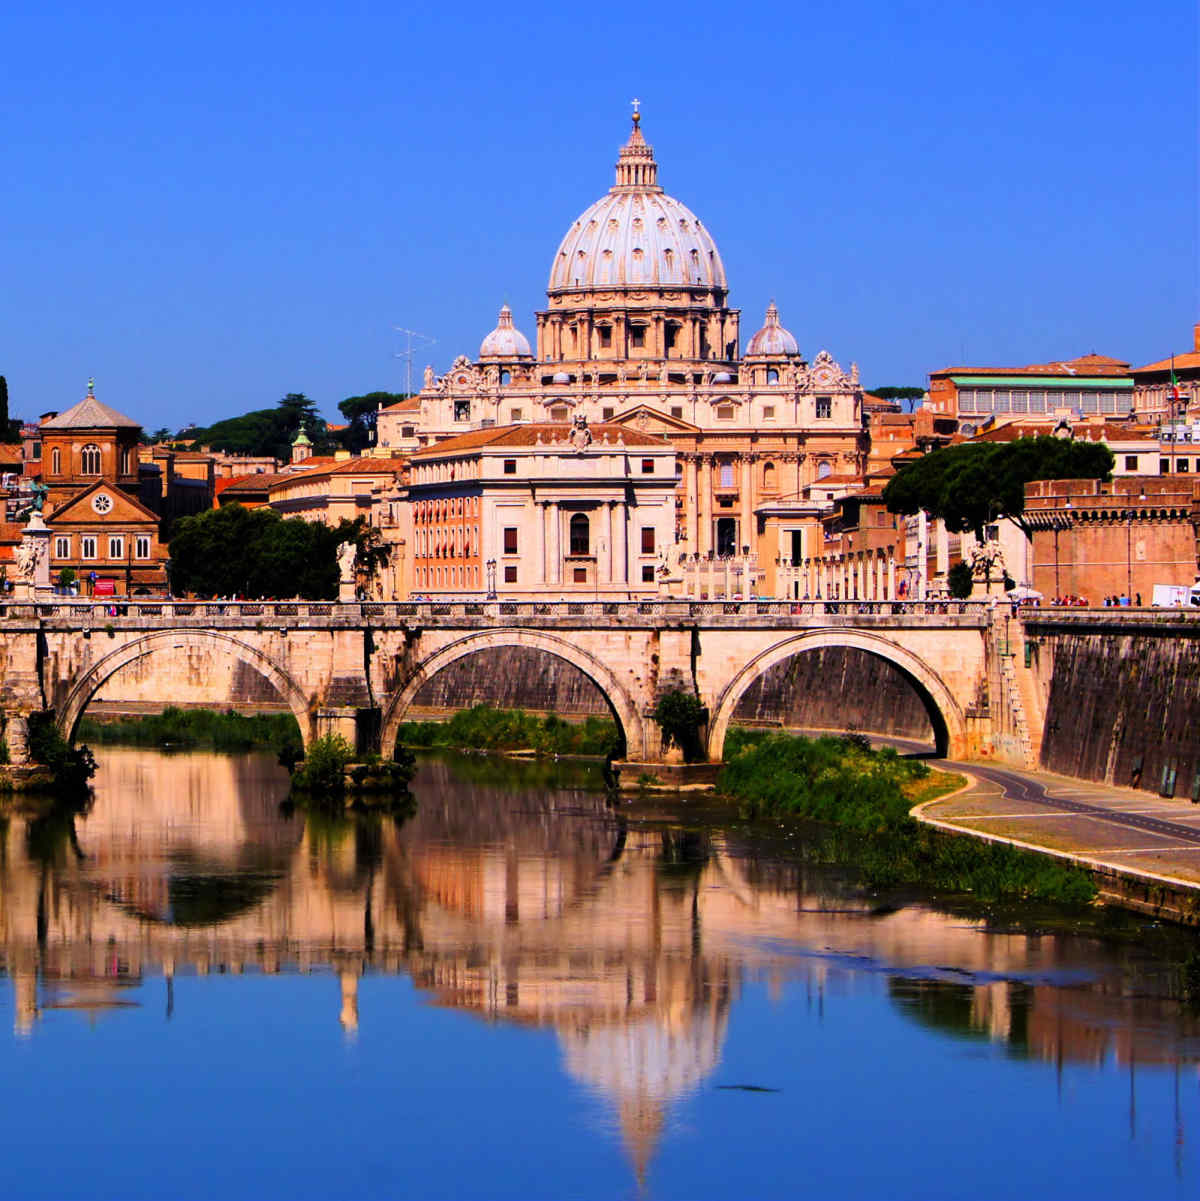 Vacation Package to Rome Rome City Explorer Vacation Package